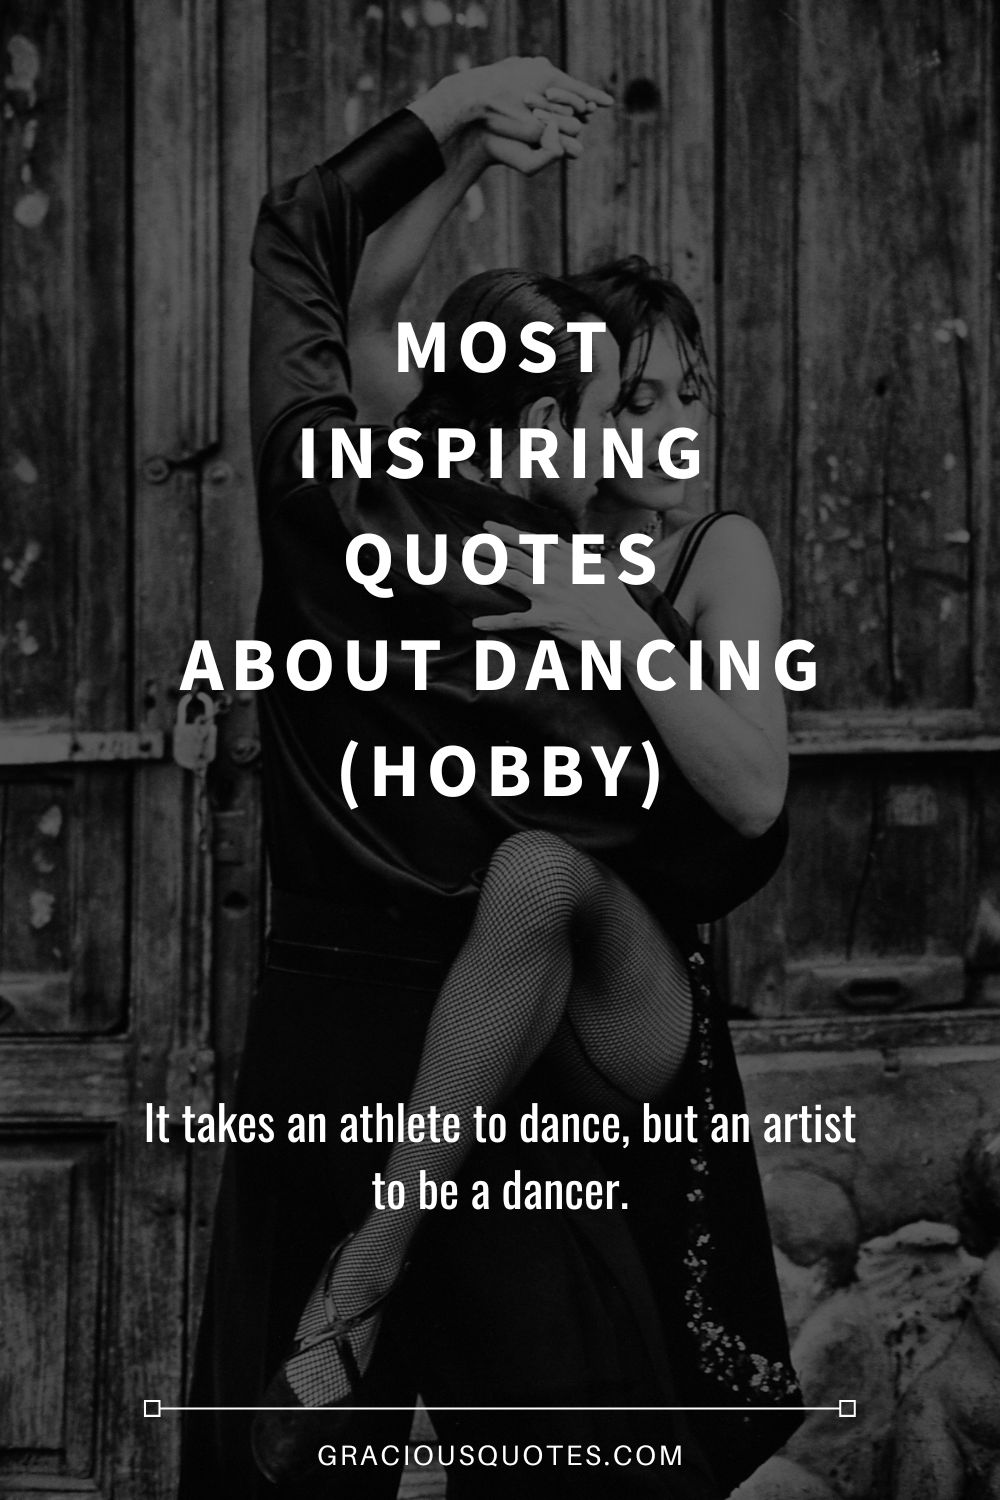 Most Inspiring Quotes About Dancing (HOBBY) - Gracious Quotes